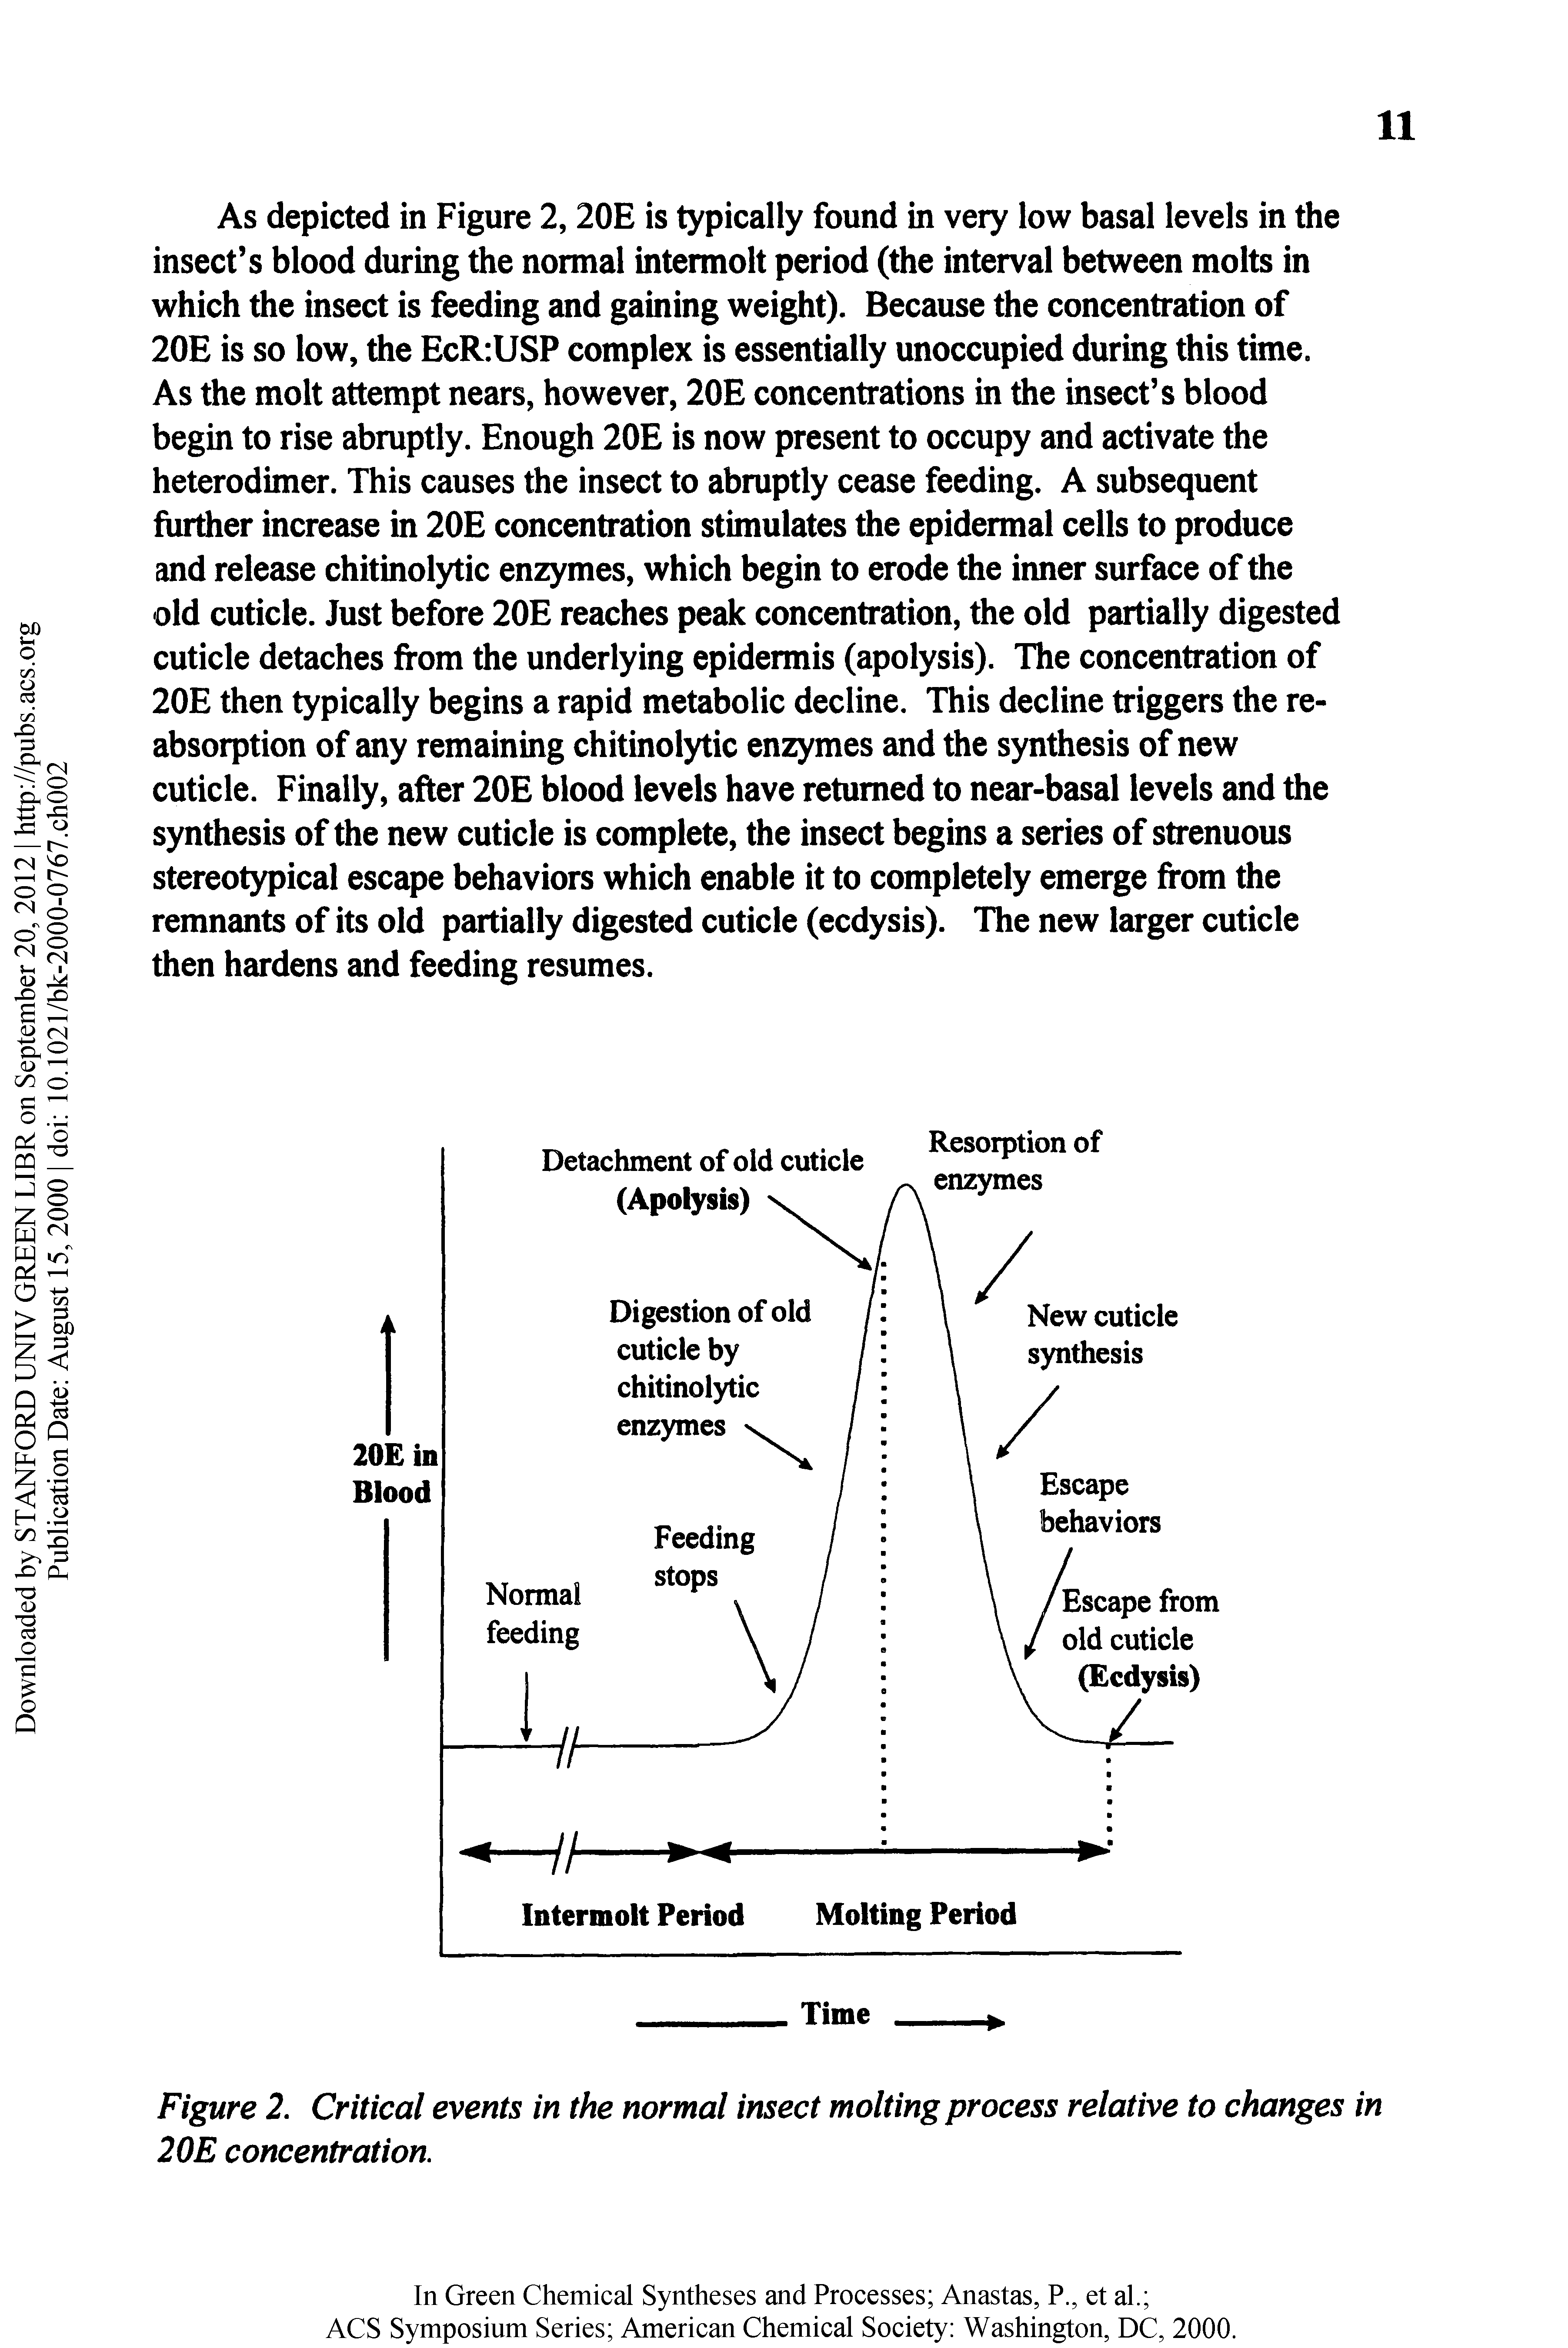 Figure 2. Critical events in the normal insect molting process relative to changes in 20E concentration.